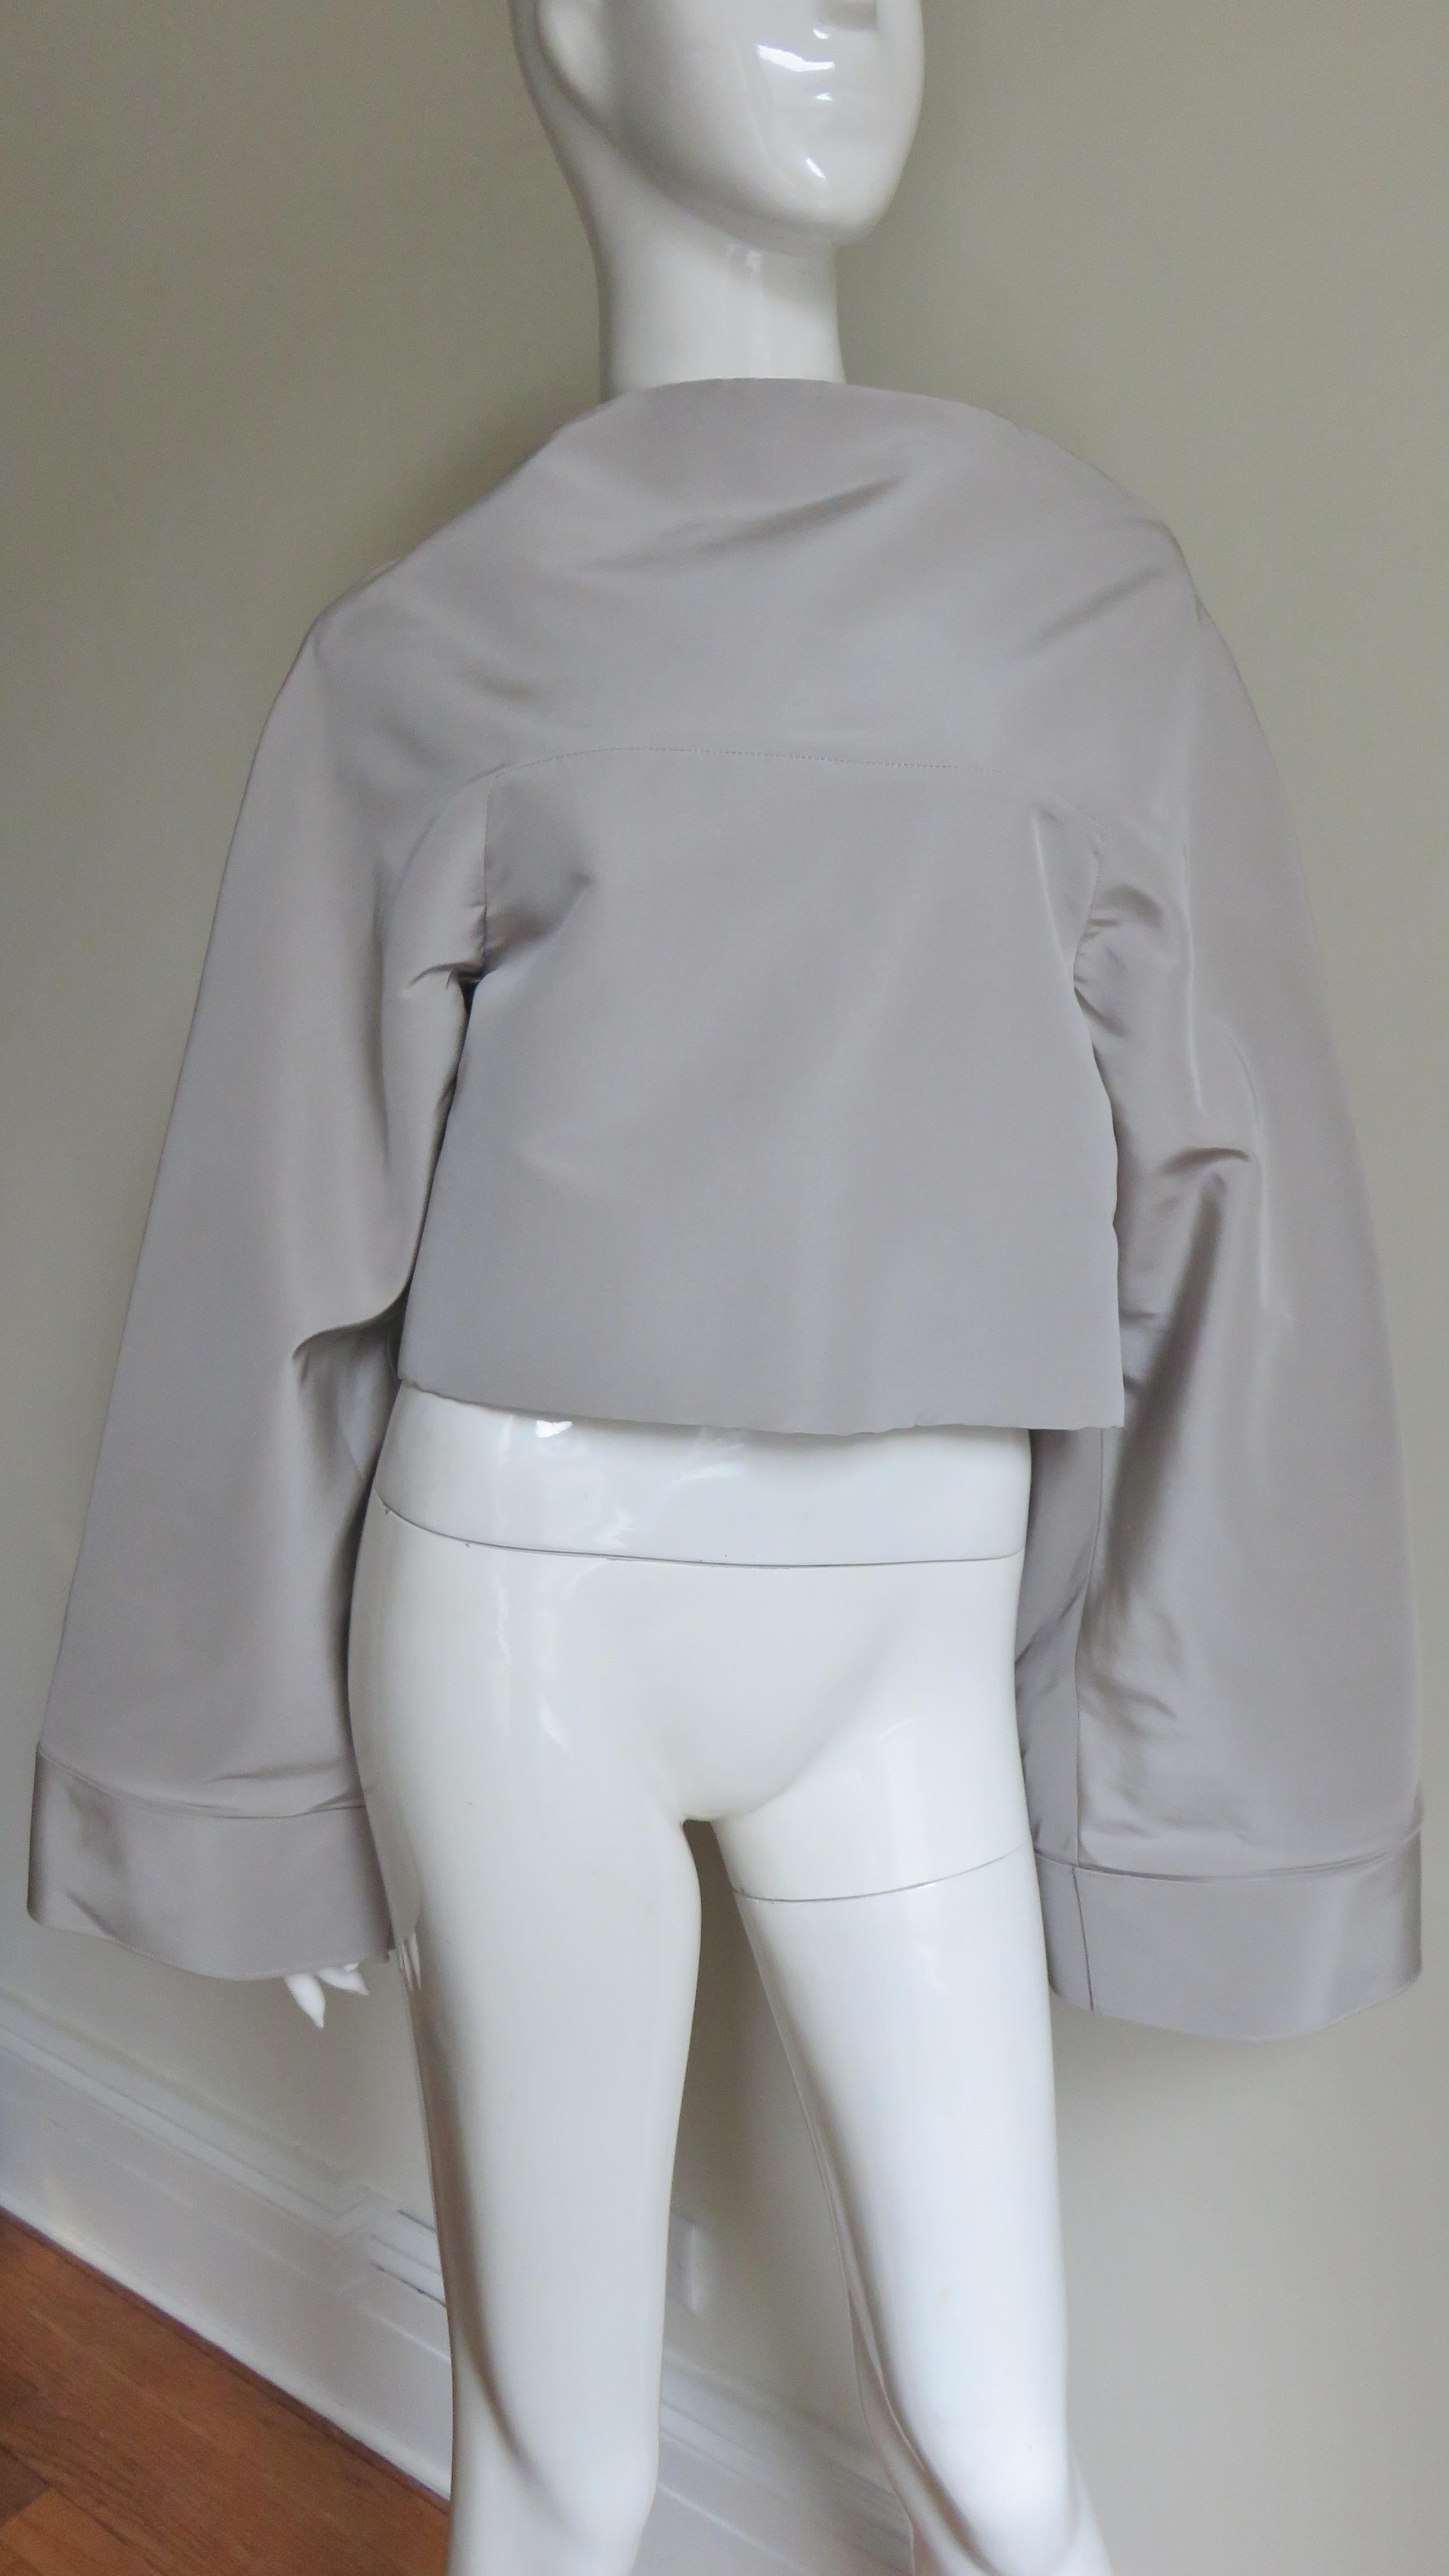 An incredible pale taupe silk jacket top by Gareth Pugh. It has a curved bateau neckline and a front yoke incorporating the wide cuffed sleeves. The back has a separating zipper and the top is lined in the same fabric. 
Fits sizes Extra Small,